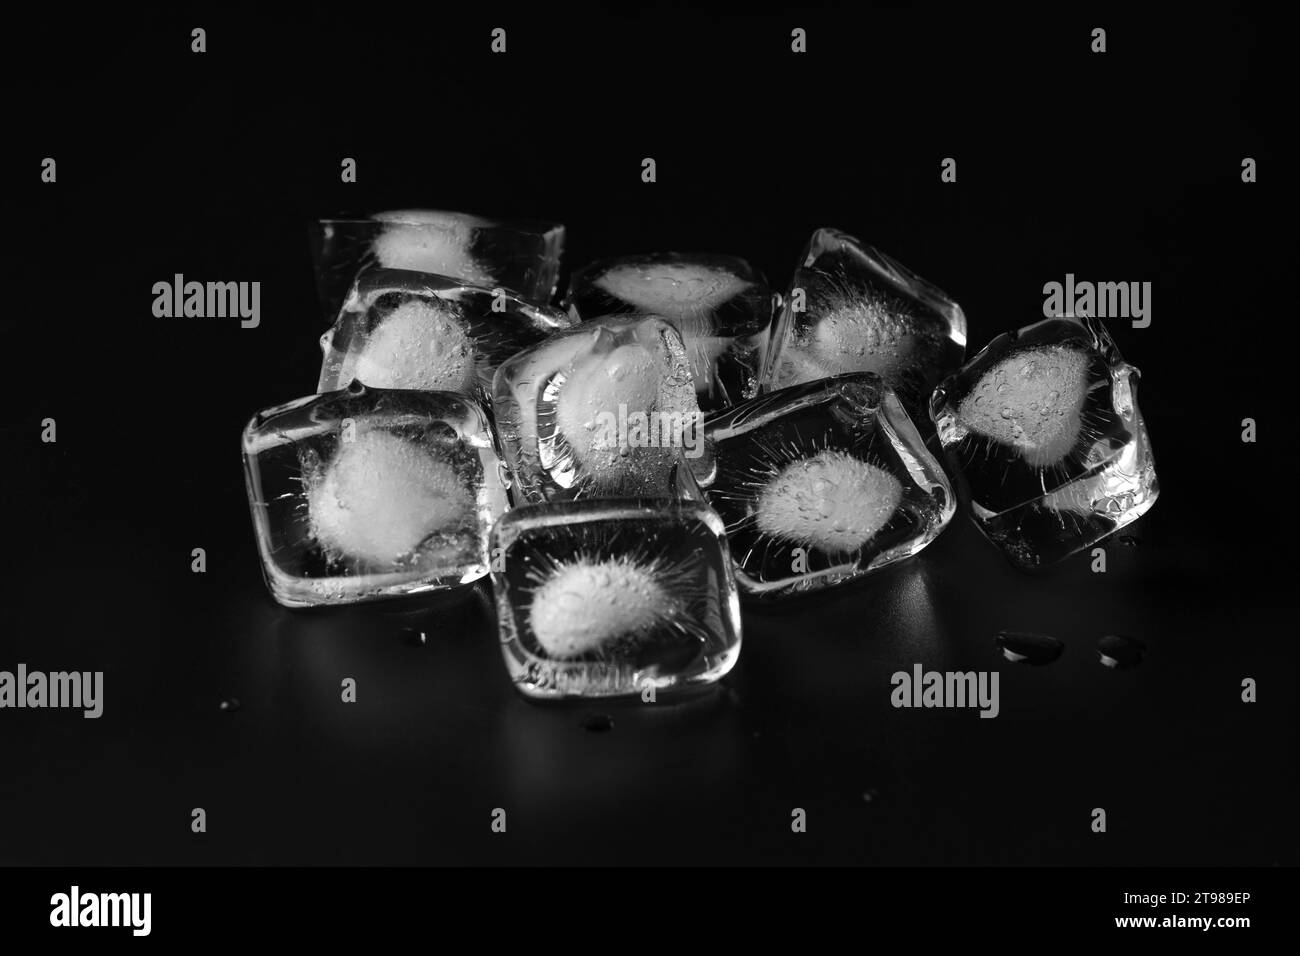 https://c8.alamy.com/comp/2T989EP/ice-cubes-isolated-on-black-background-2T989EP.jpg